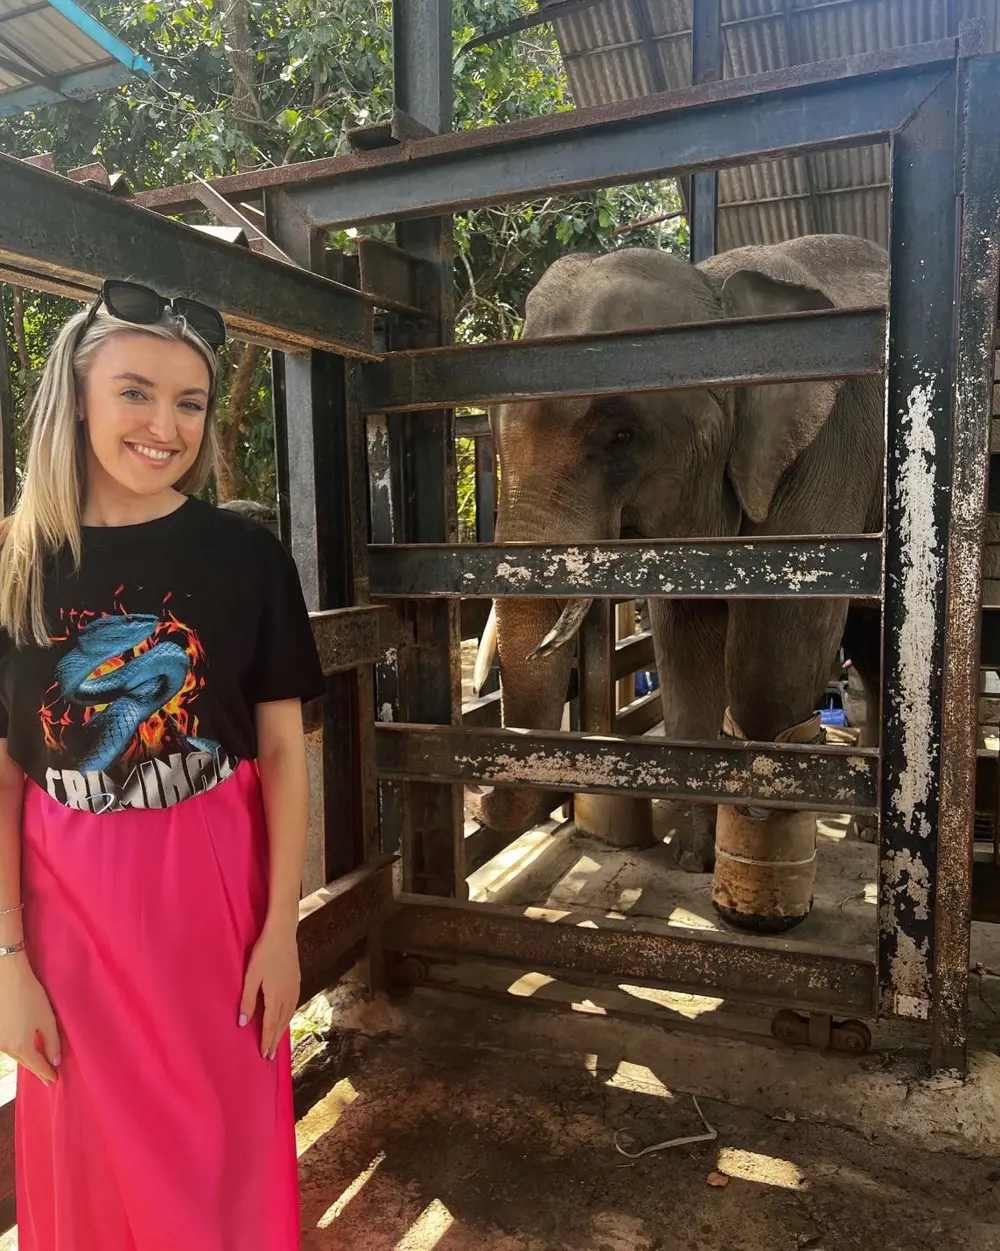 A female biomedical engineer standing next to an elephant with a prosthetic foot in an elephant sanctuary, surrounded by trees.